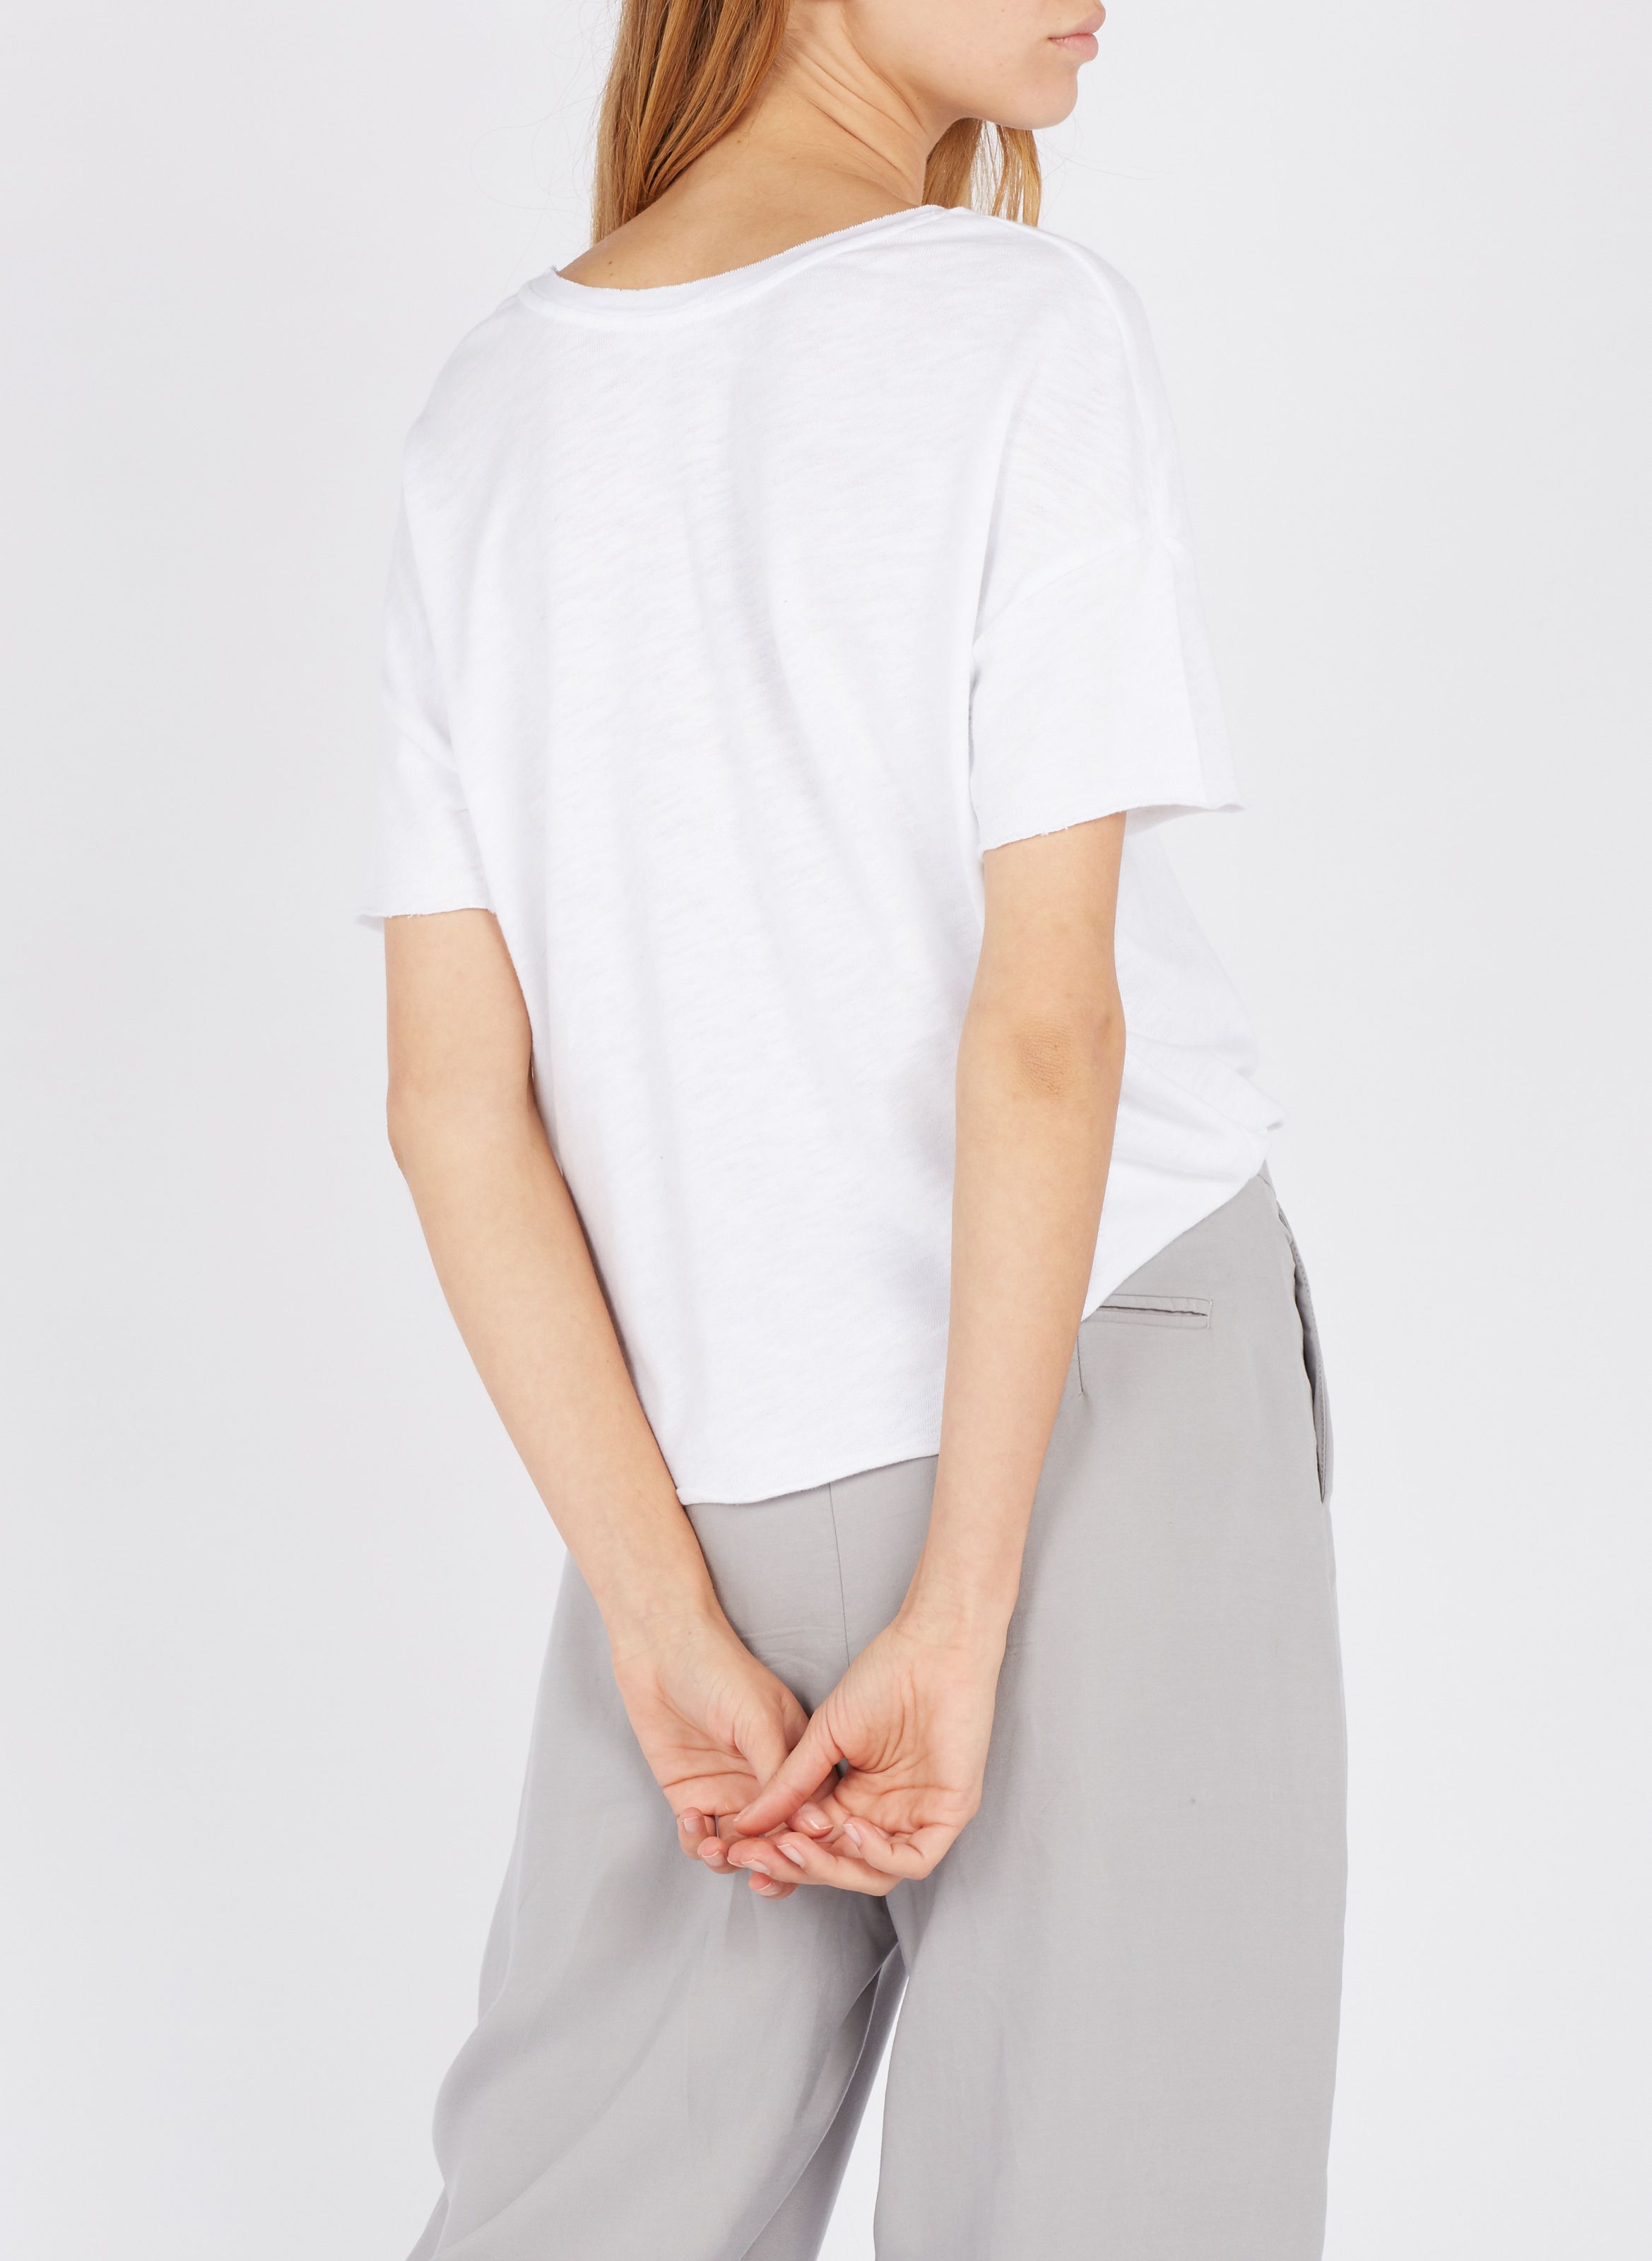 loose fitting white tee